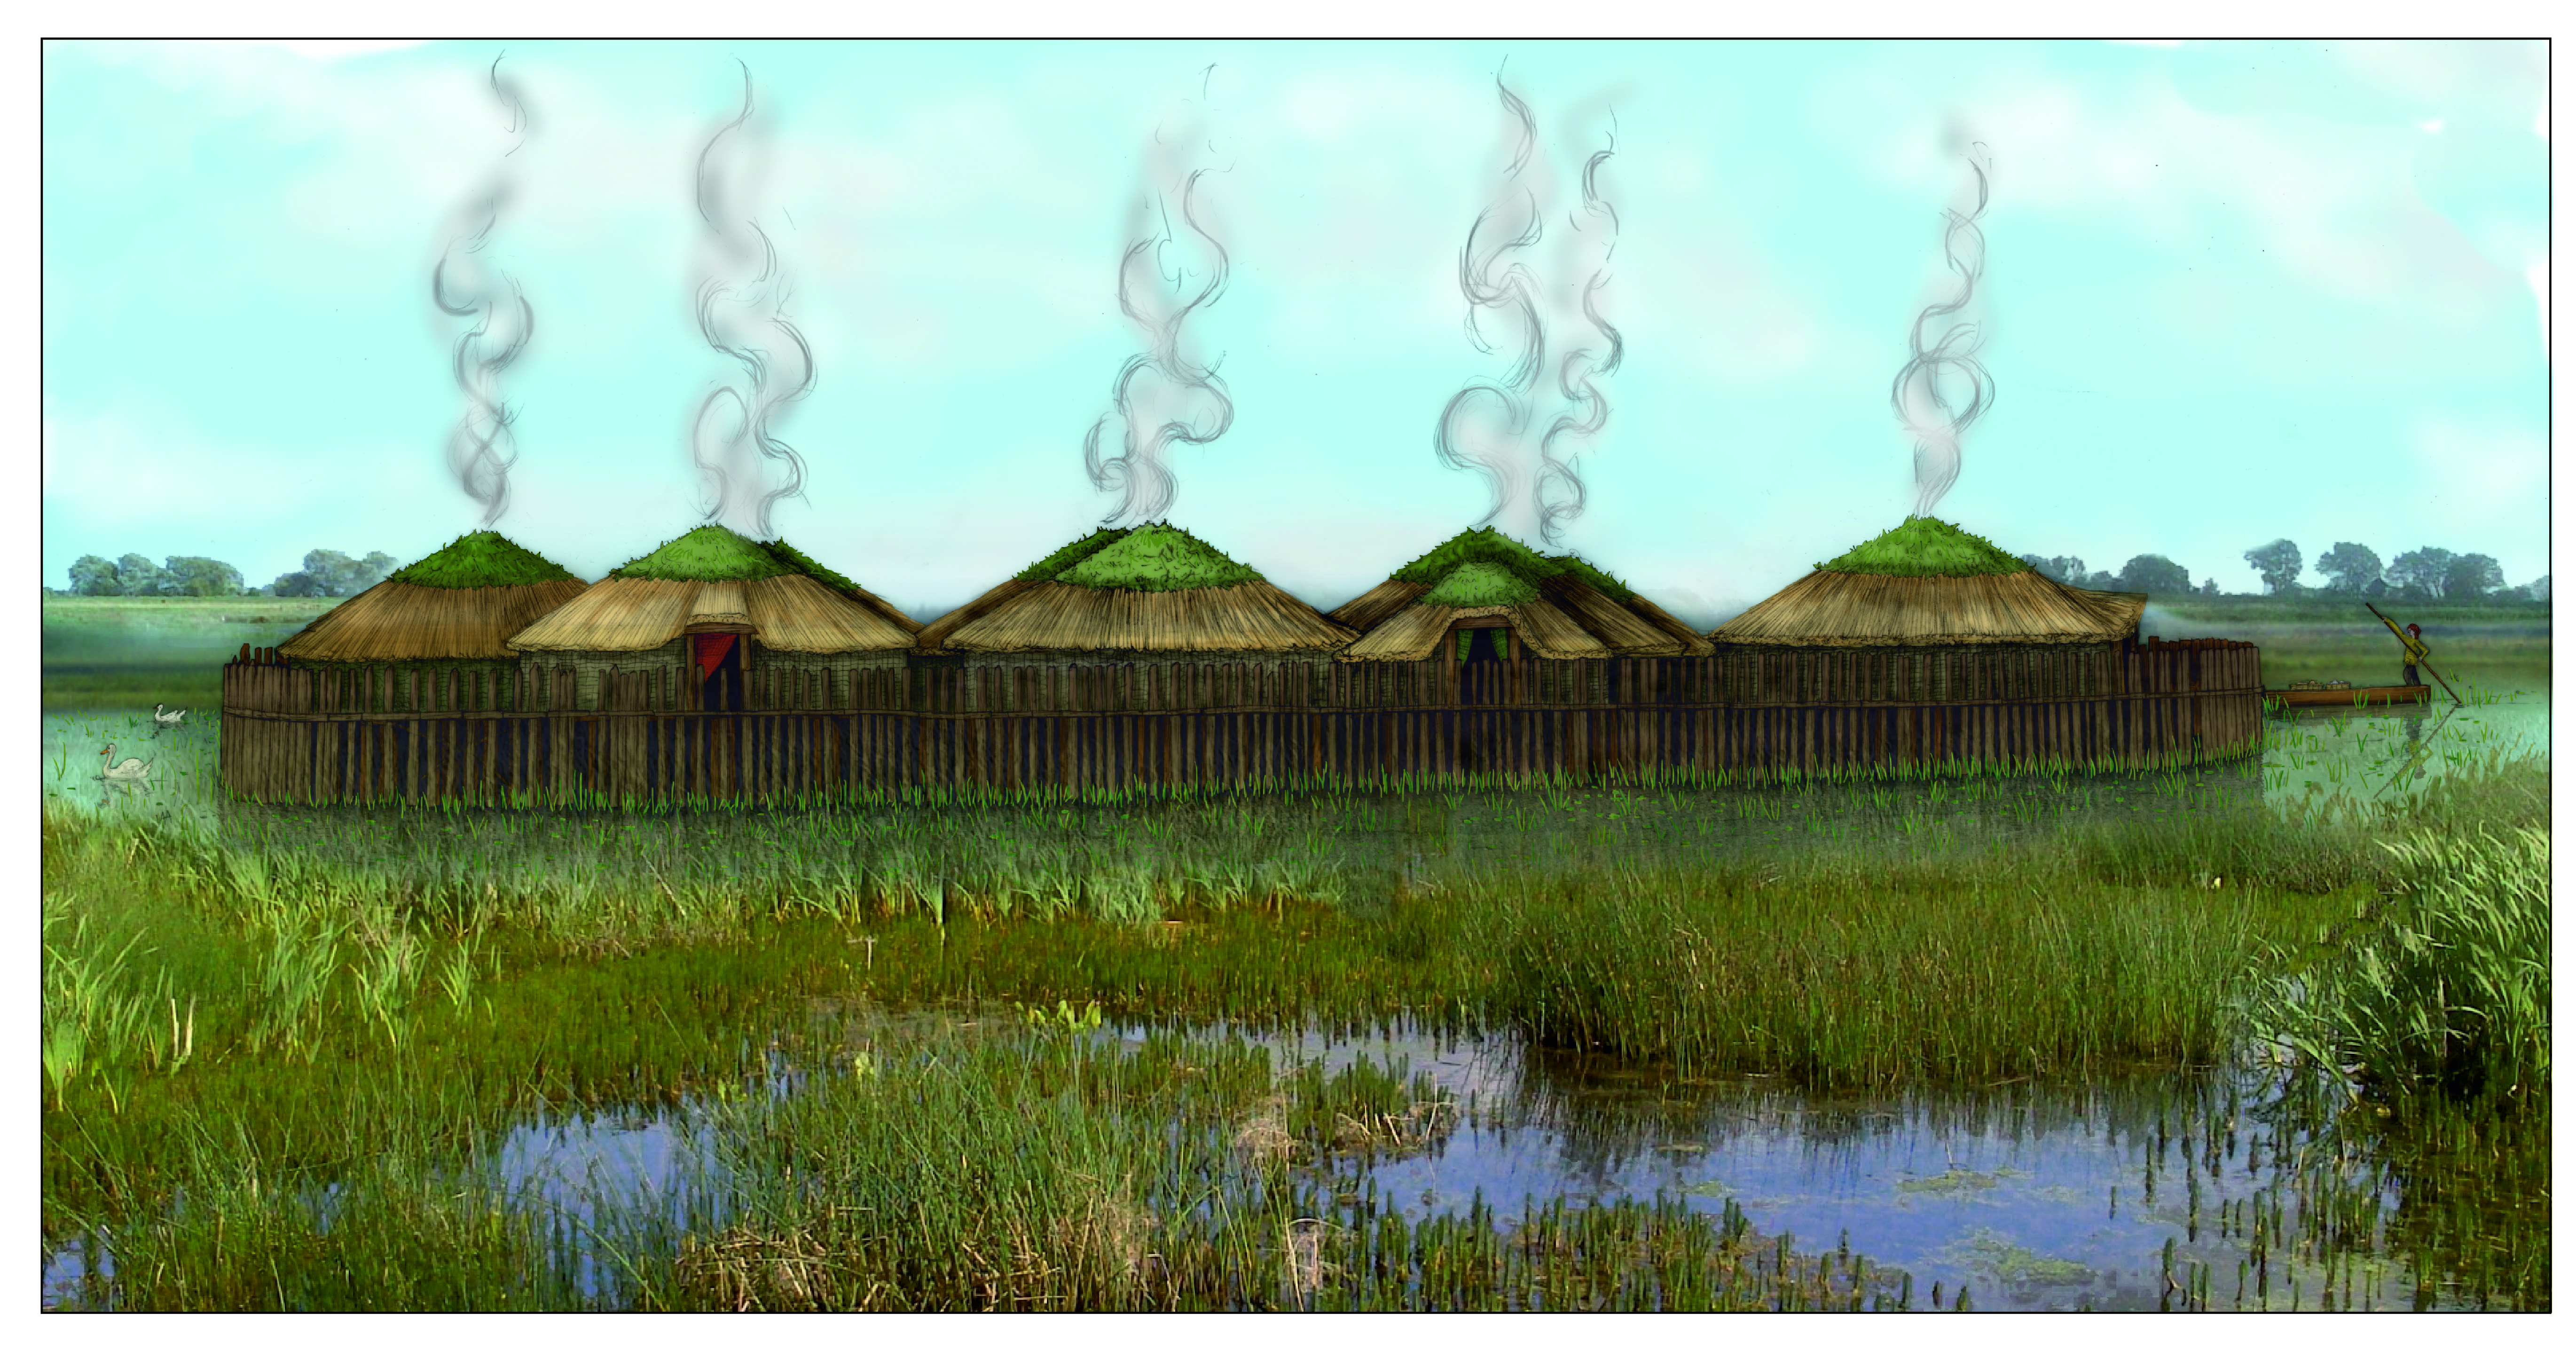 An artist's impression of what the circular wooden homes on stilts would have looked like. (Cambridge Archaeological Unit/ PA)